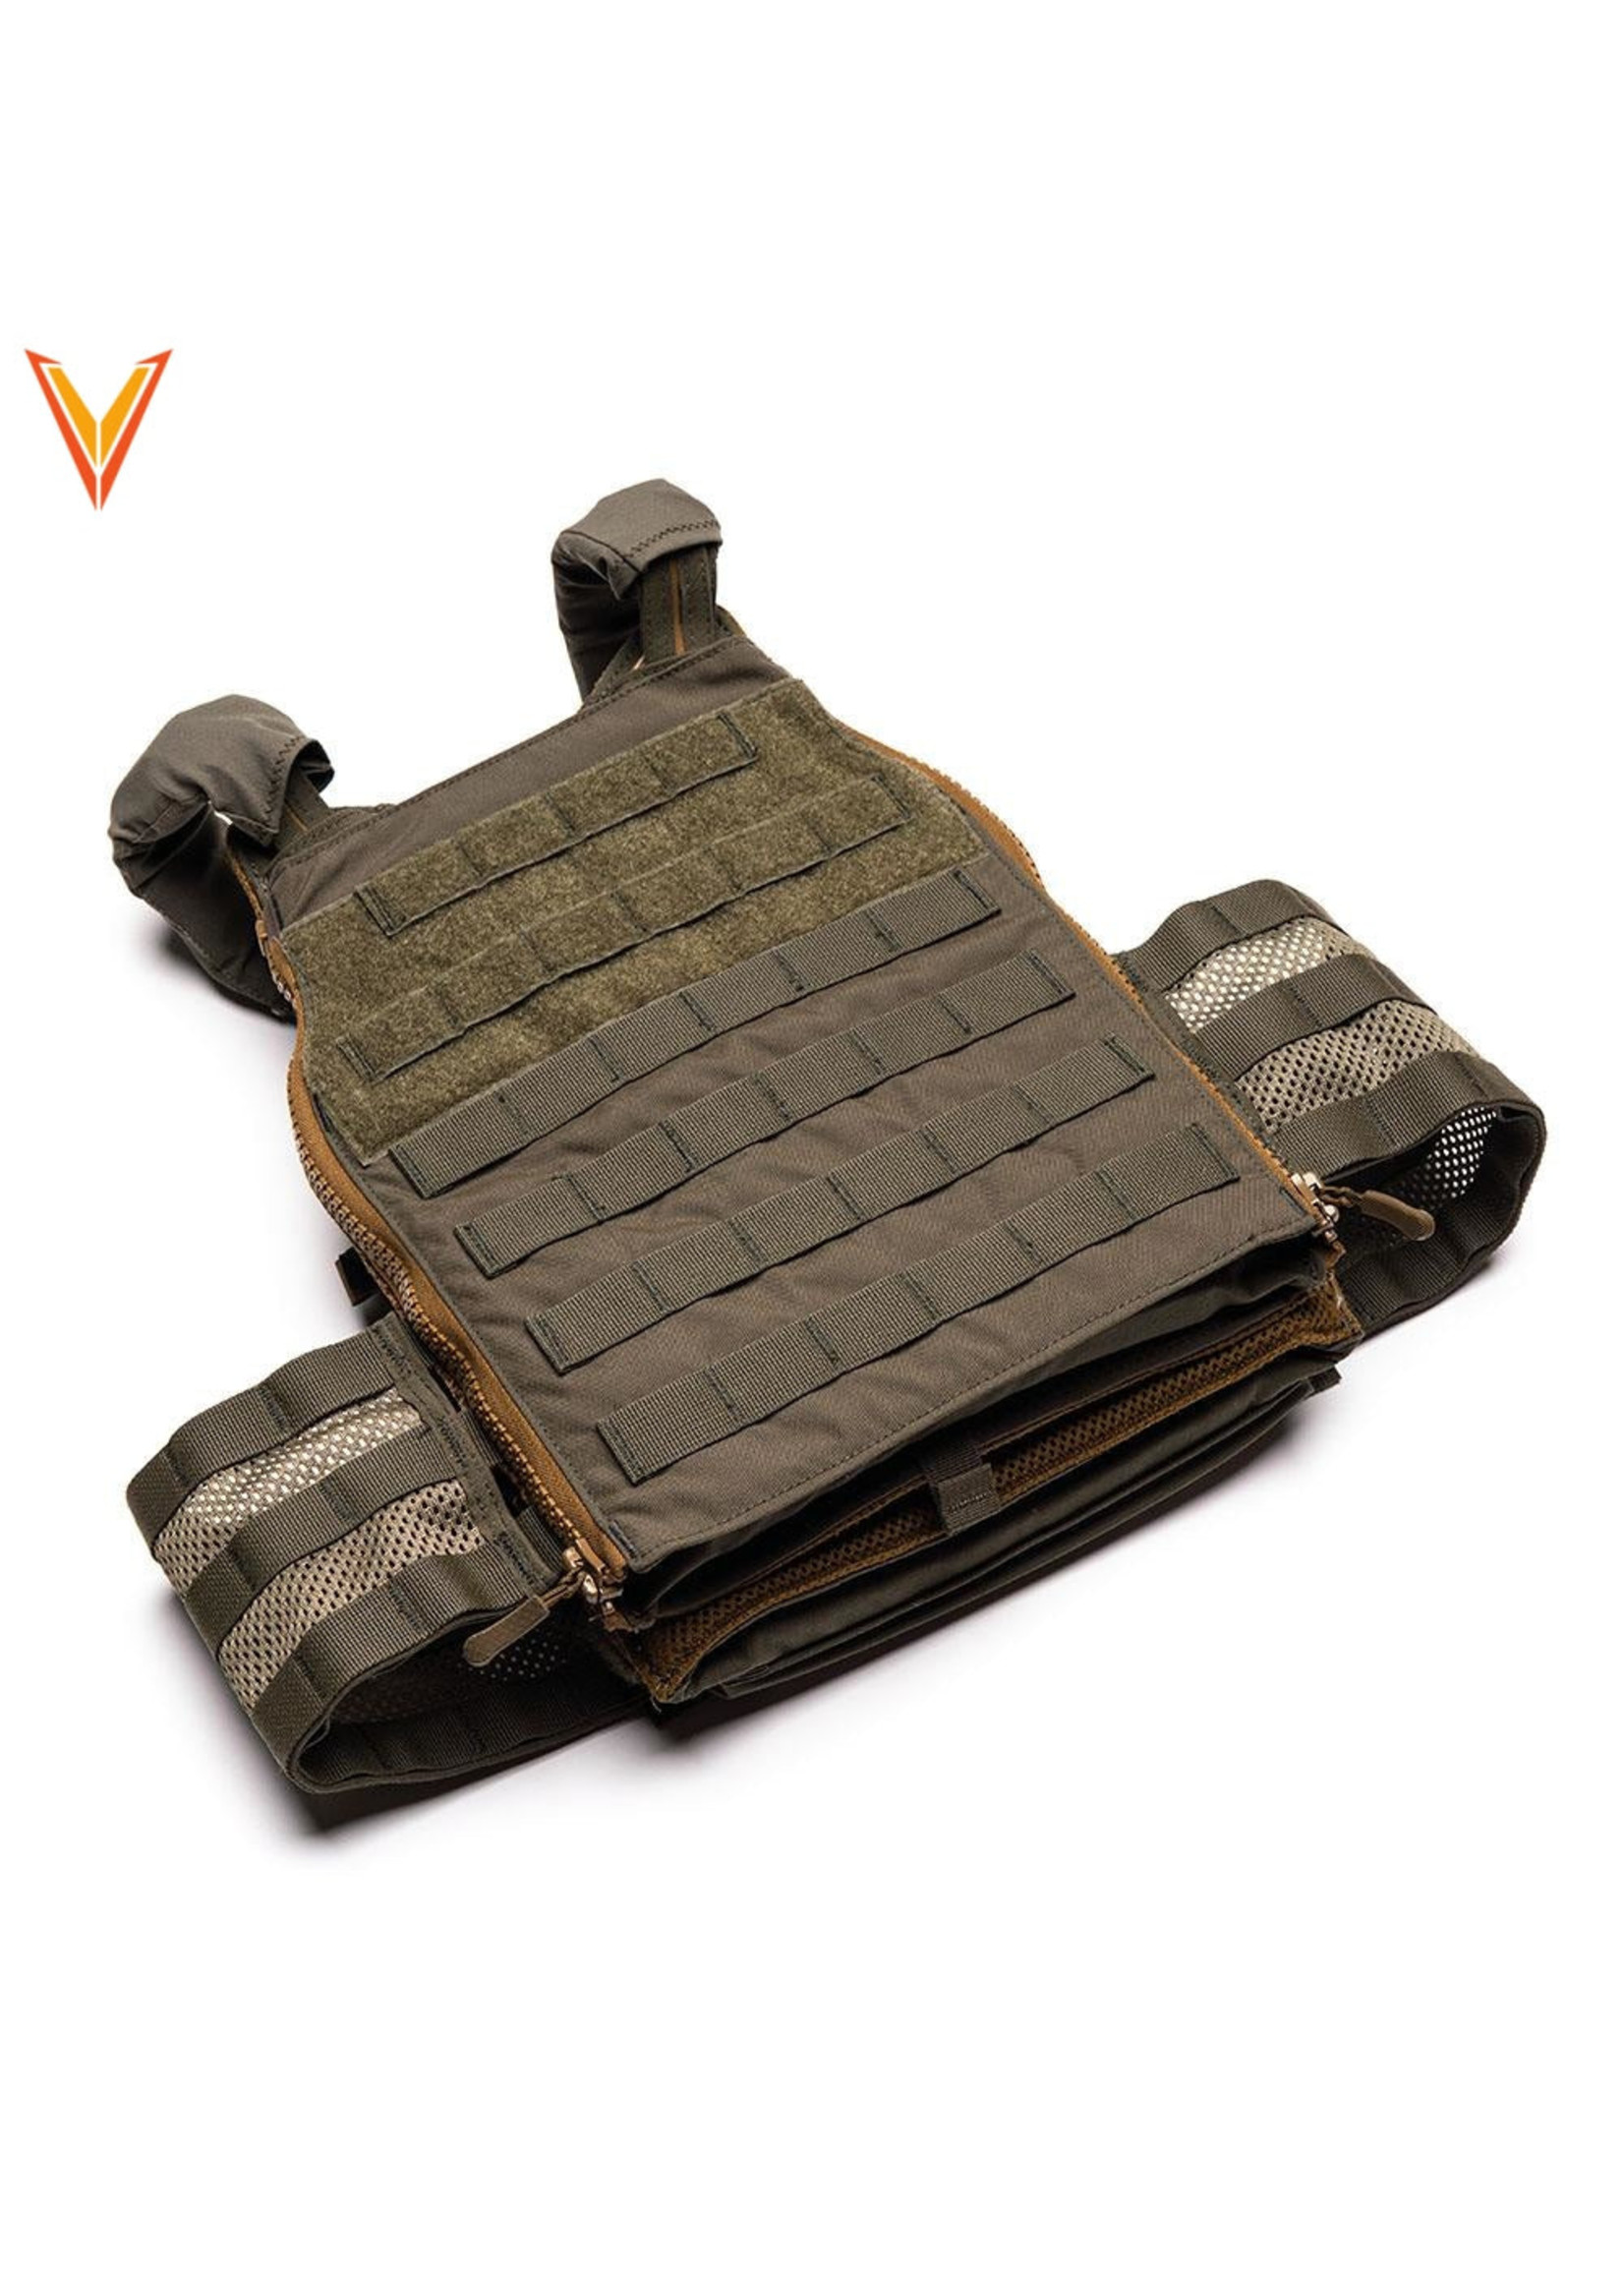 VELOCITY SYSTEMS SCARAB LT MOLLE ZIP-ON BACK PANEL